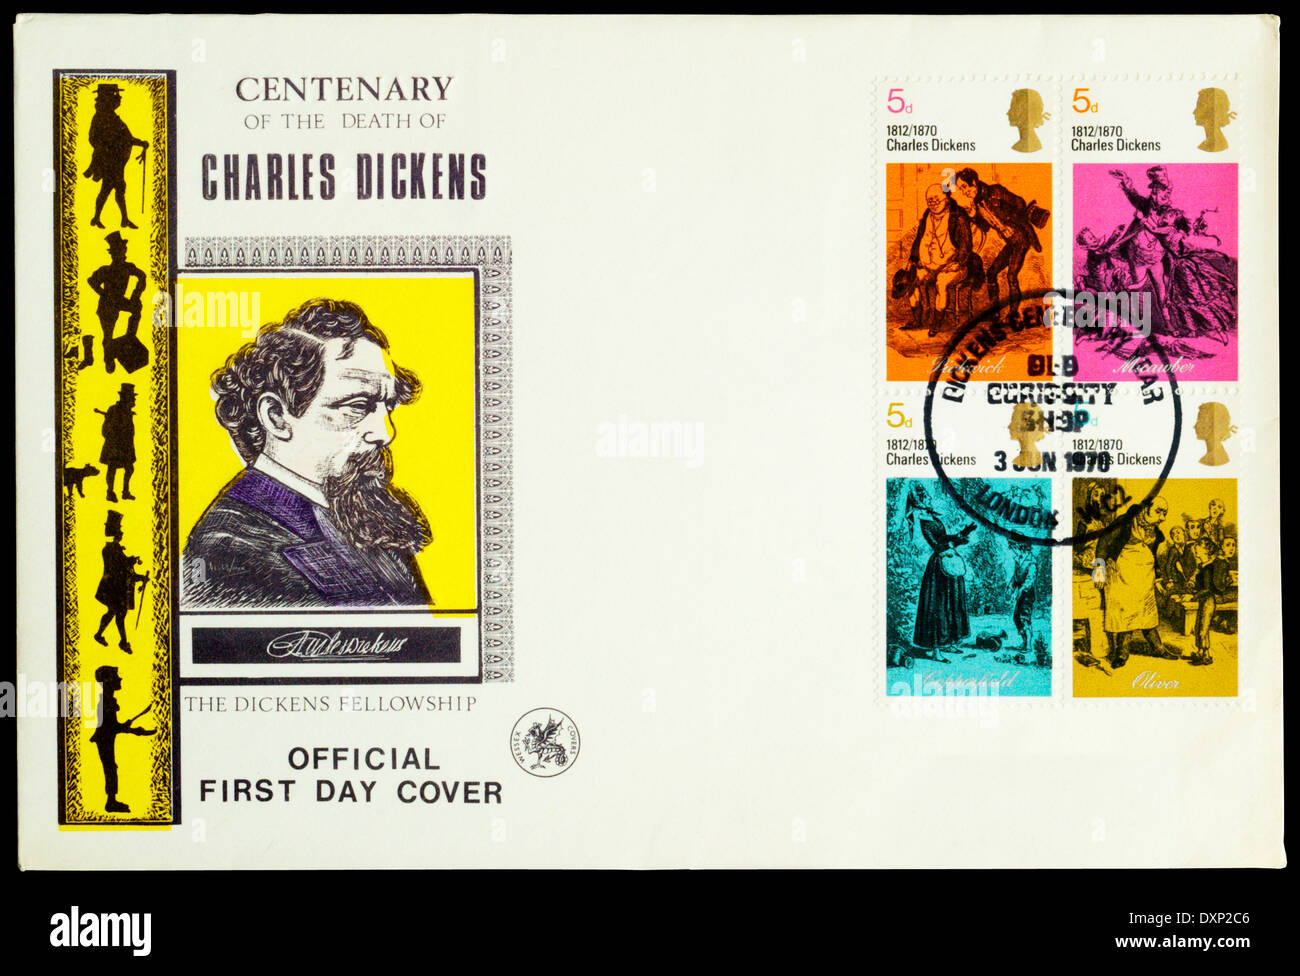 1970 Official First Day Cover commemorating the centernary of Dickens' Death. With Old Curiosity Shop postmark. Stock Photo